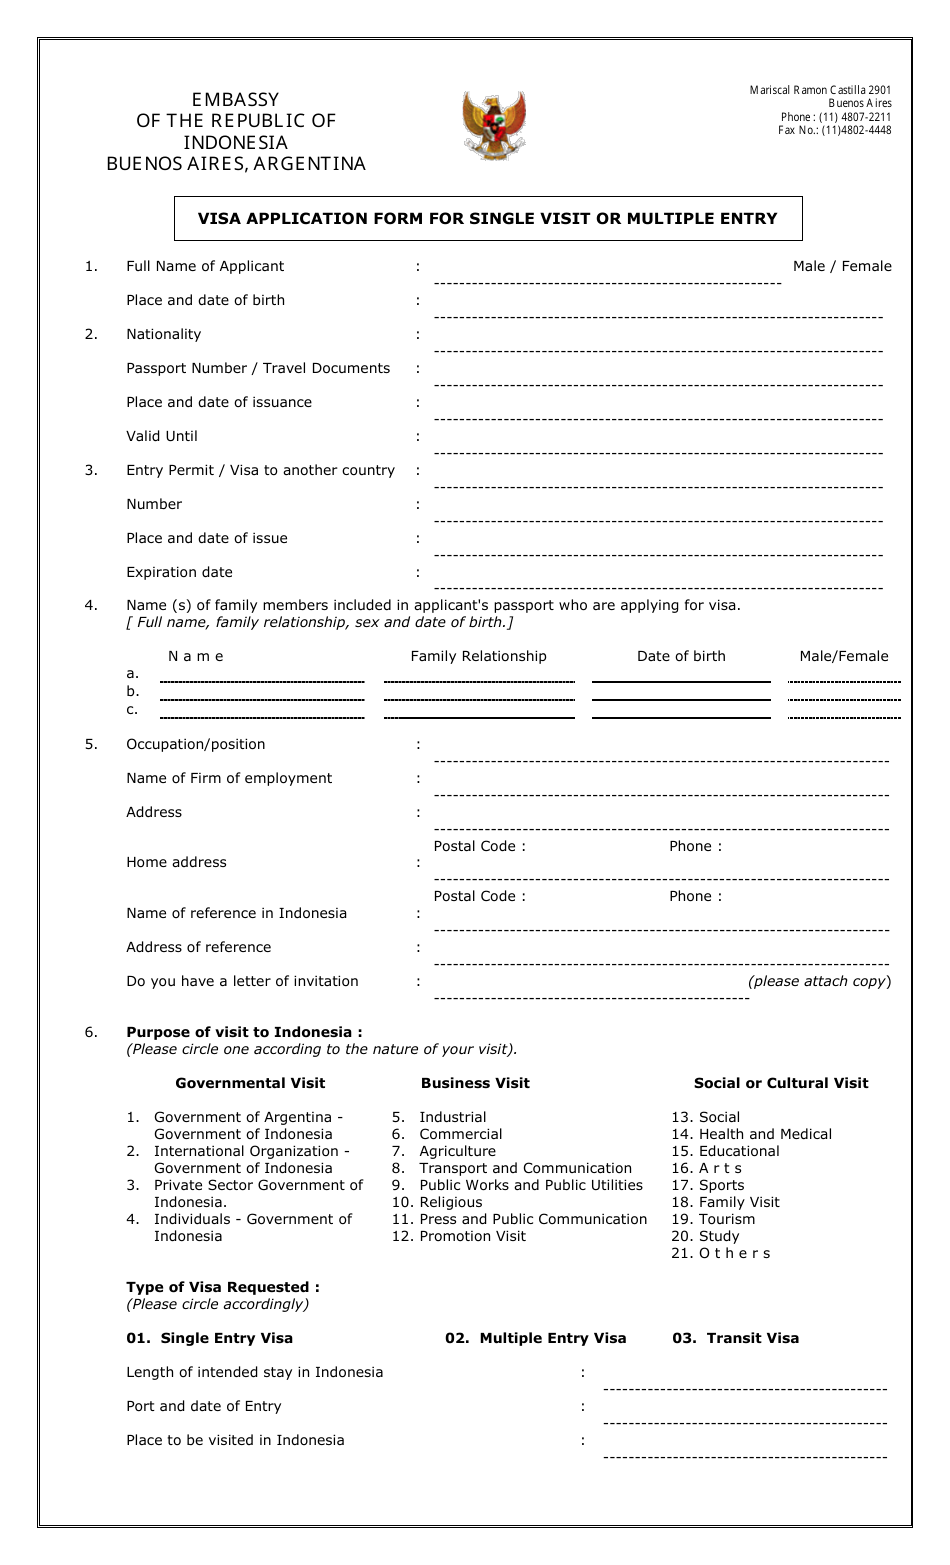 Indonesian Visa Application Form for Single Visit or Multiple Entry - Embassy of the Republic of Indonesia - Buenos Aires, Argentina, Page 1